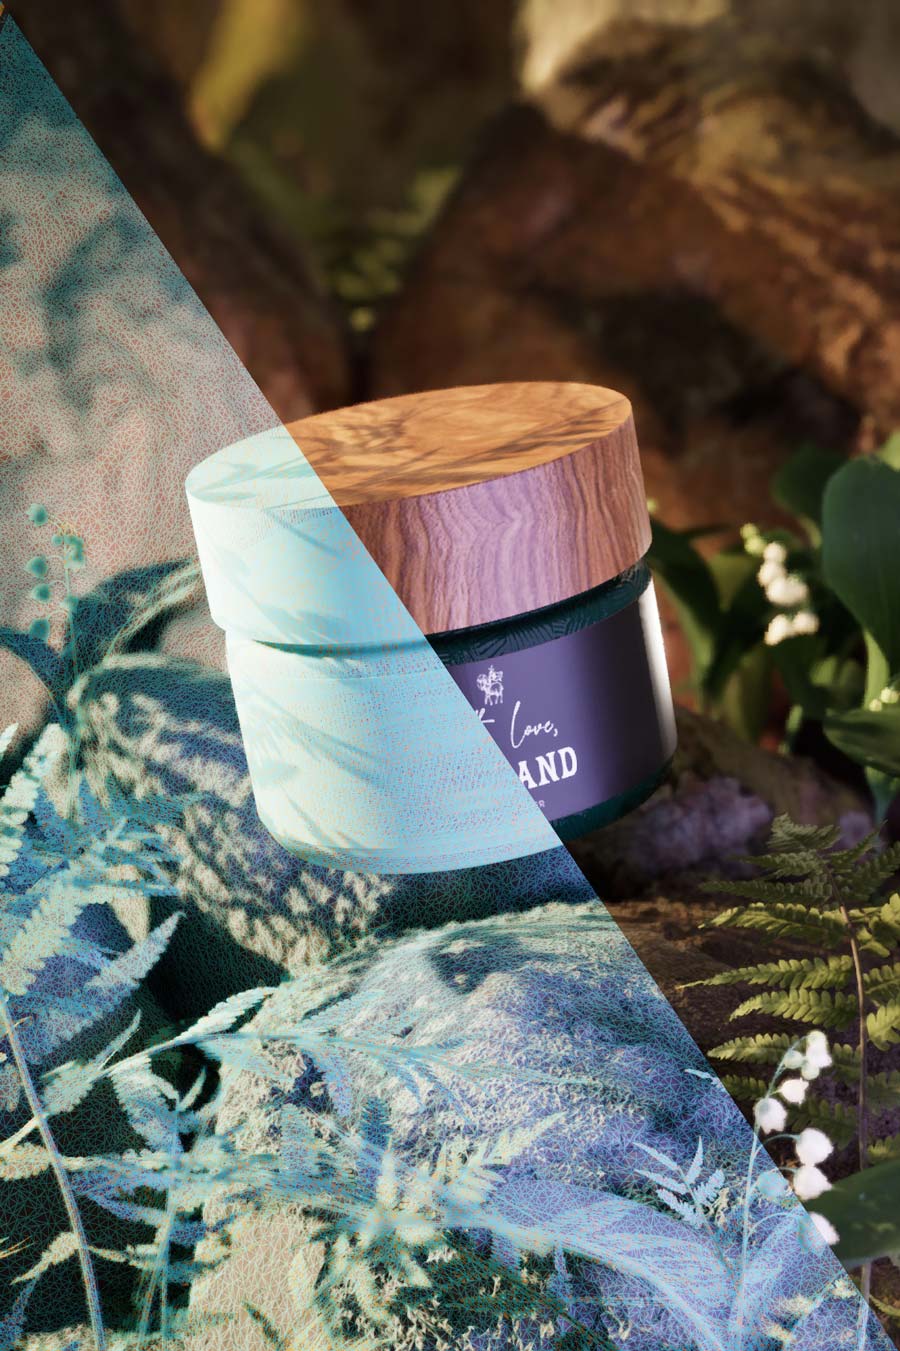 3D render of a cosmetic product set in a dense jungle. Completely computer generated.